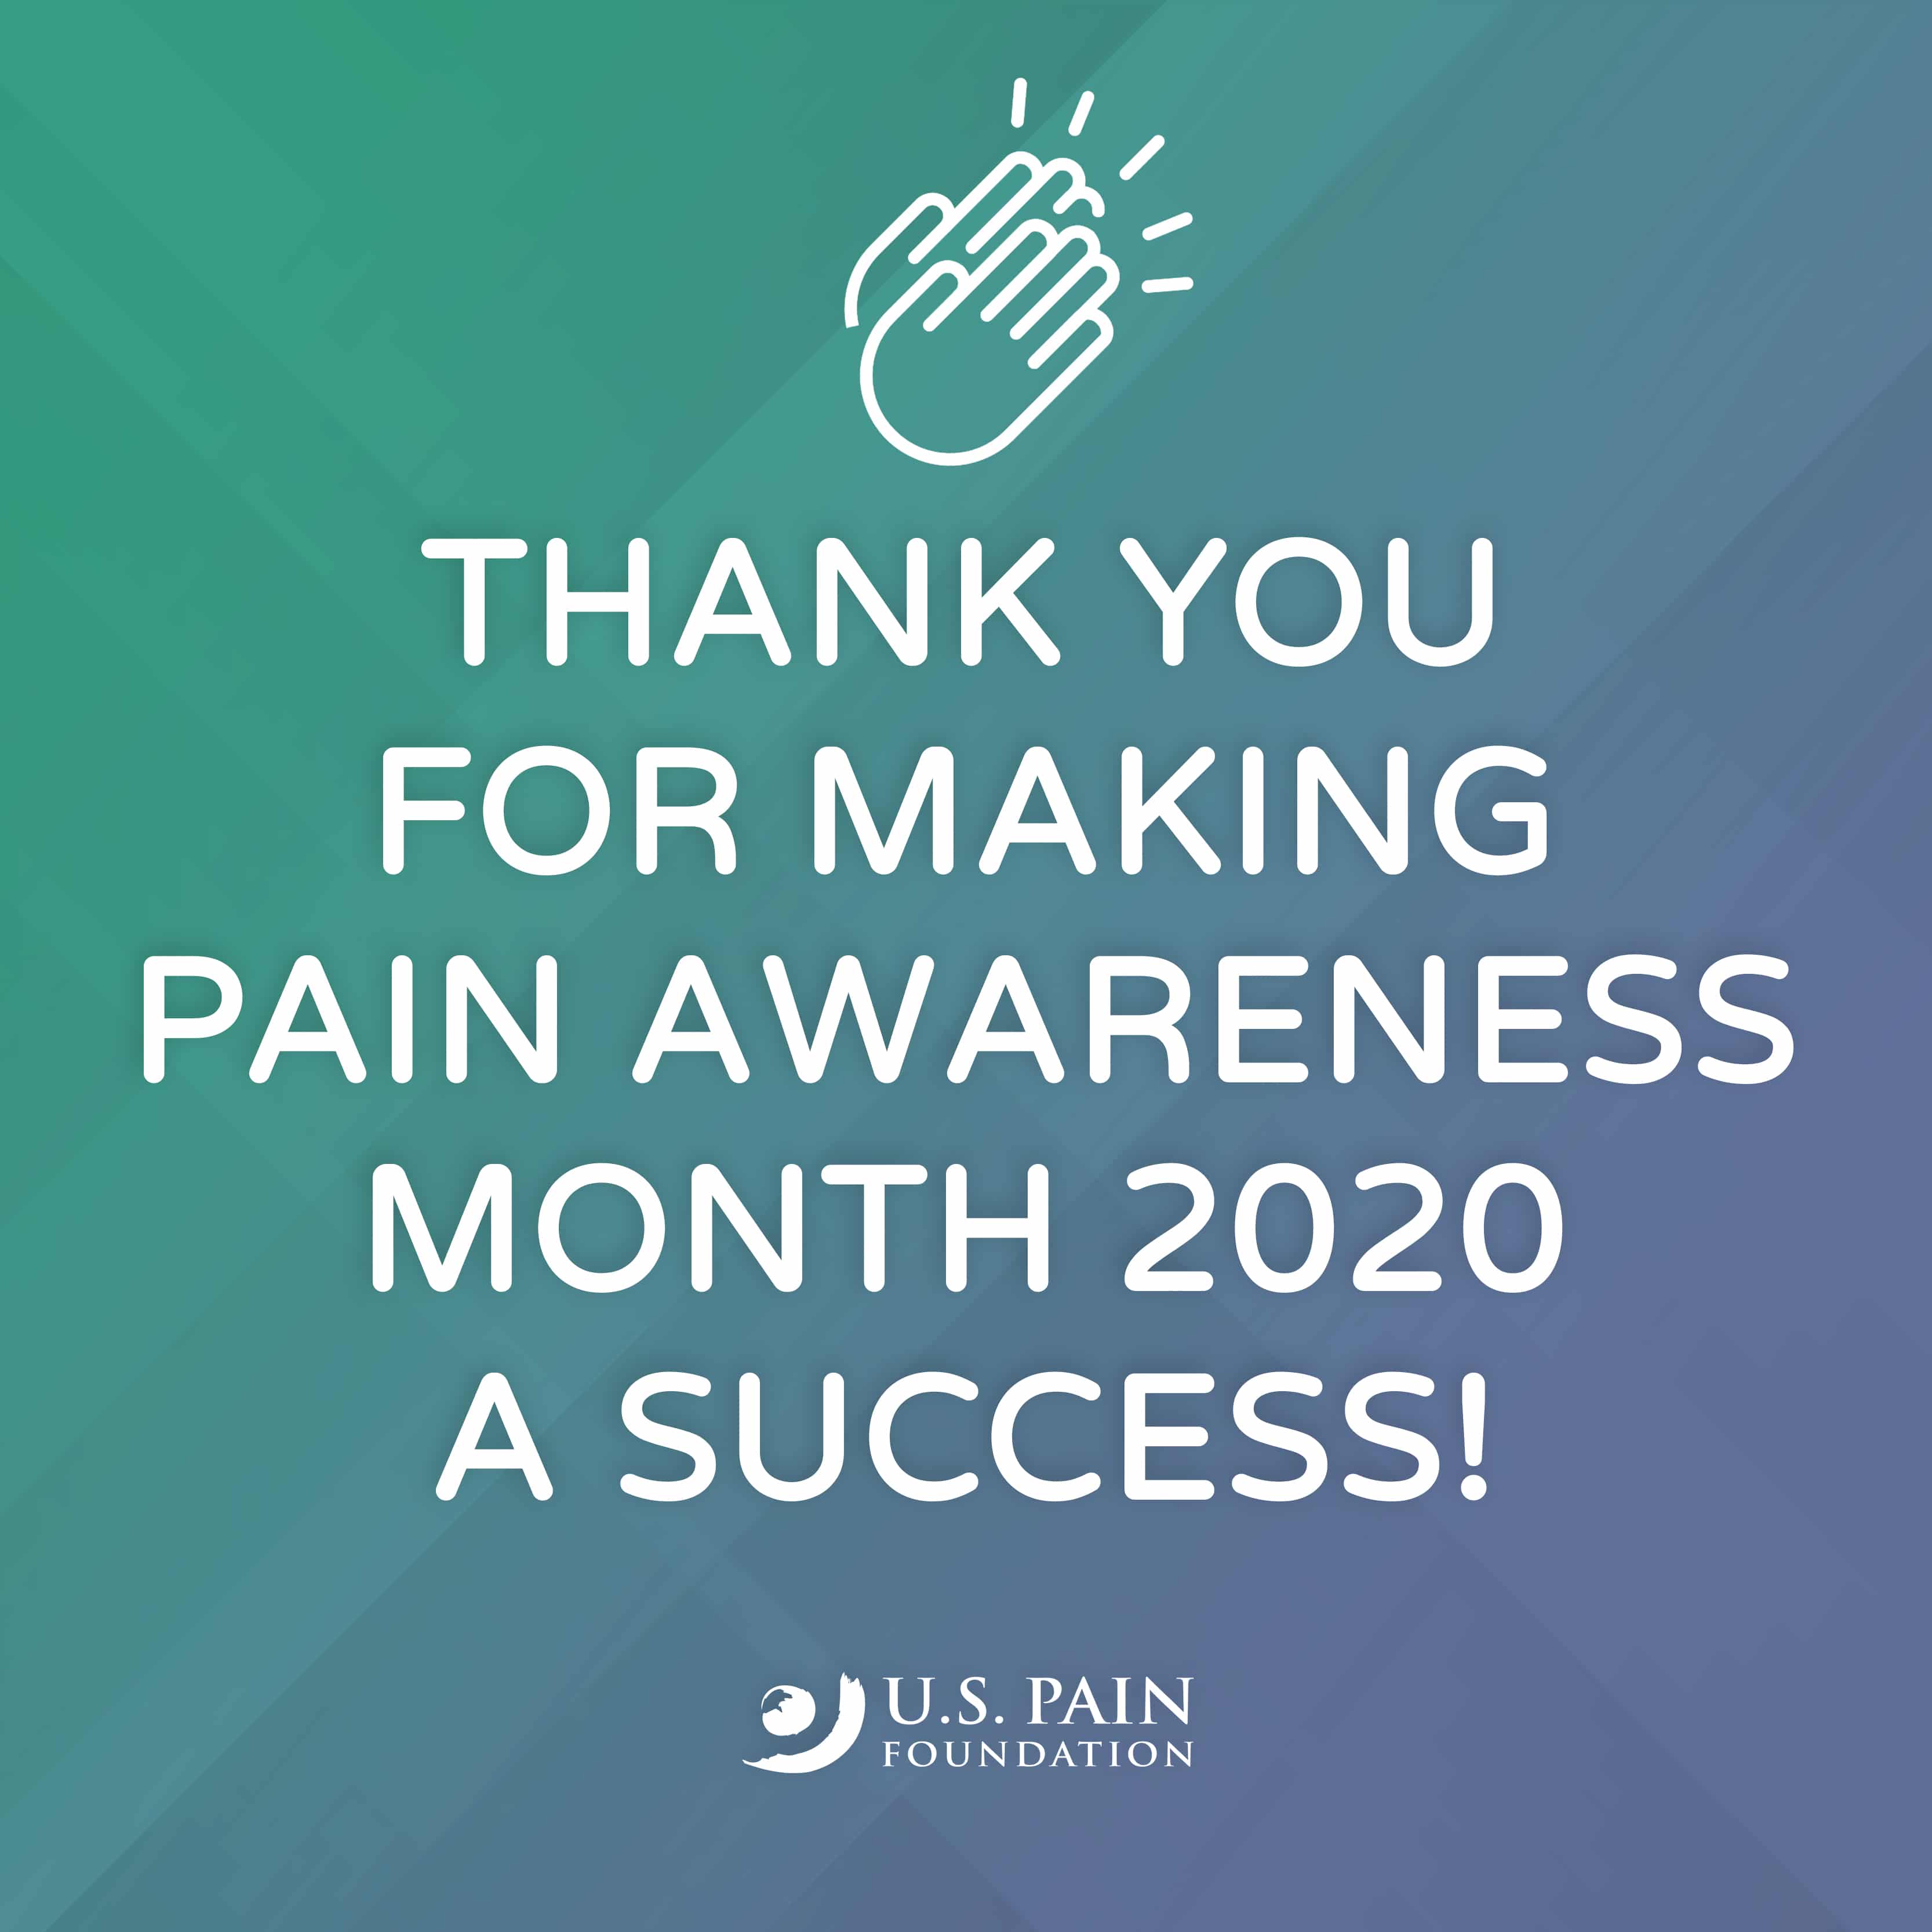 The need for improved care continues long after Pain Awareness Month